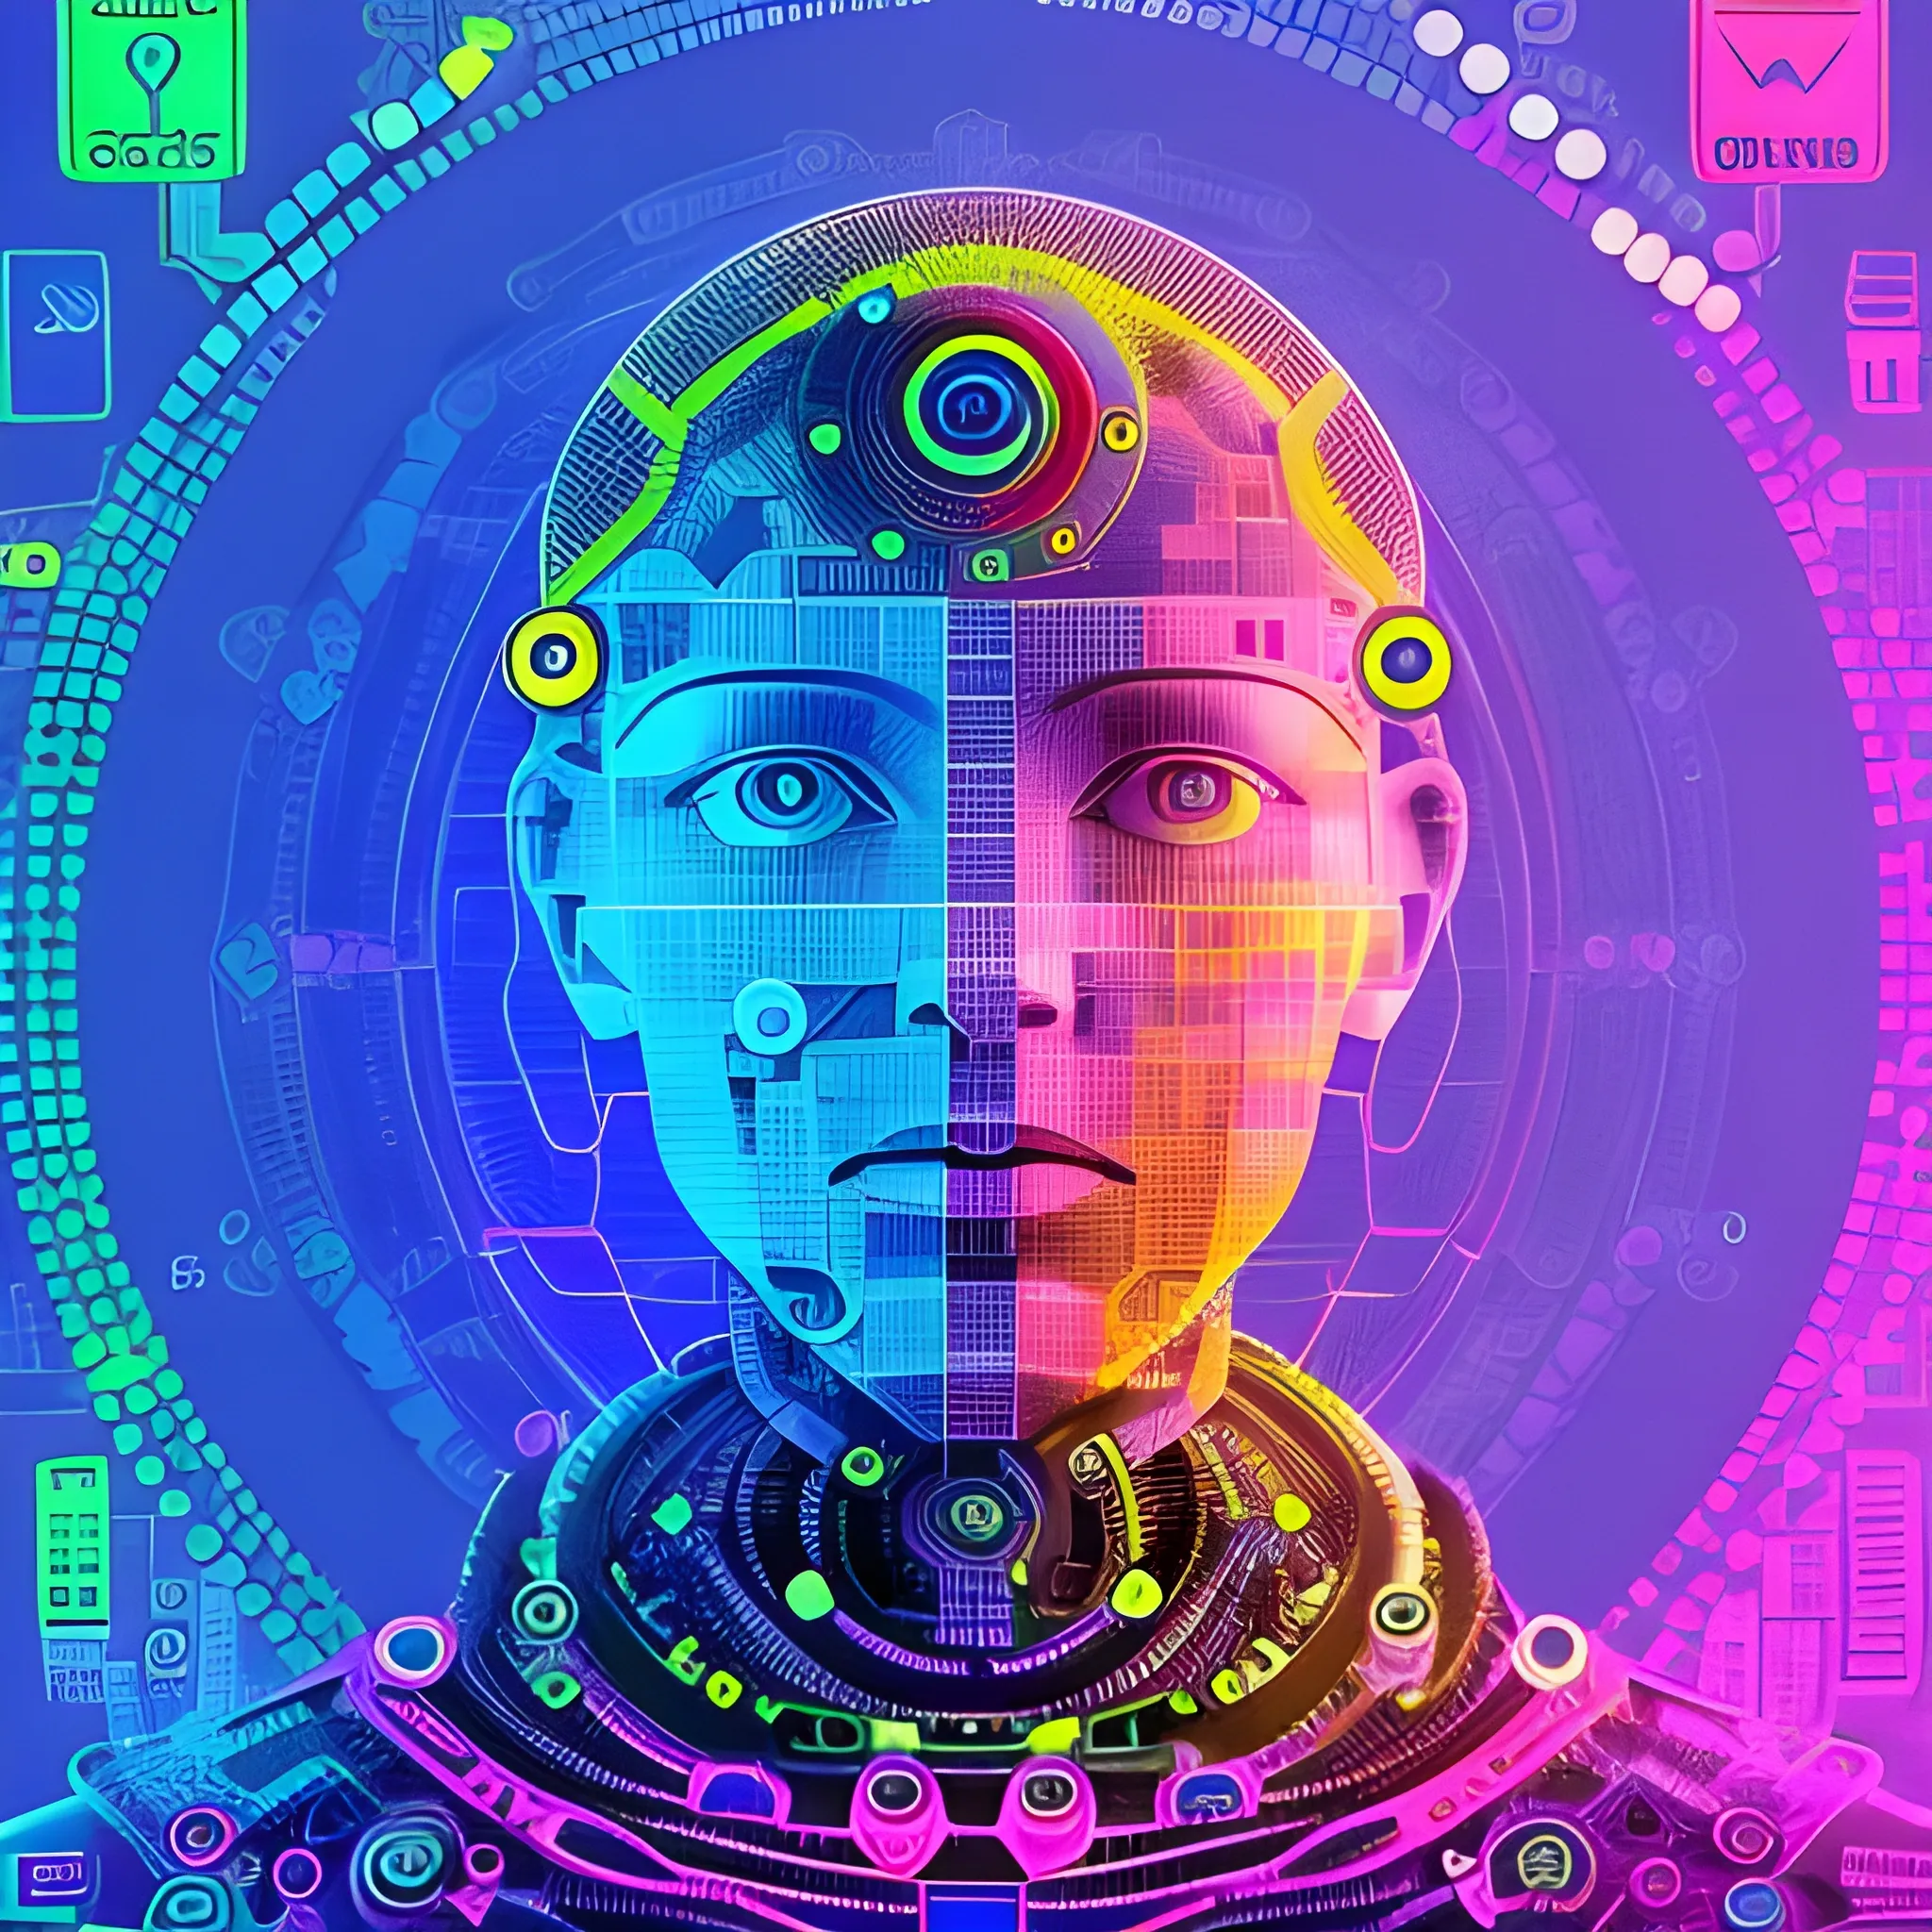 generate a corporative, future, colorful, modern image with this concept: Maintaining human agency in the age of AI
, Trippy, related to digital products. do not use machines. Use really envirment. Do not use text